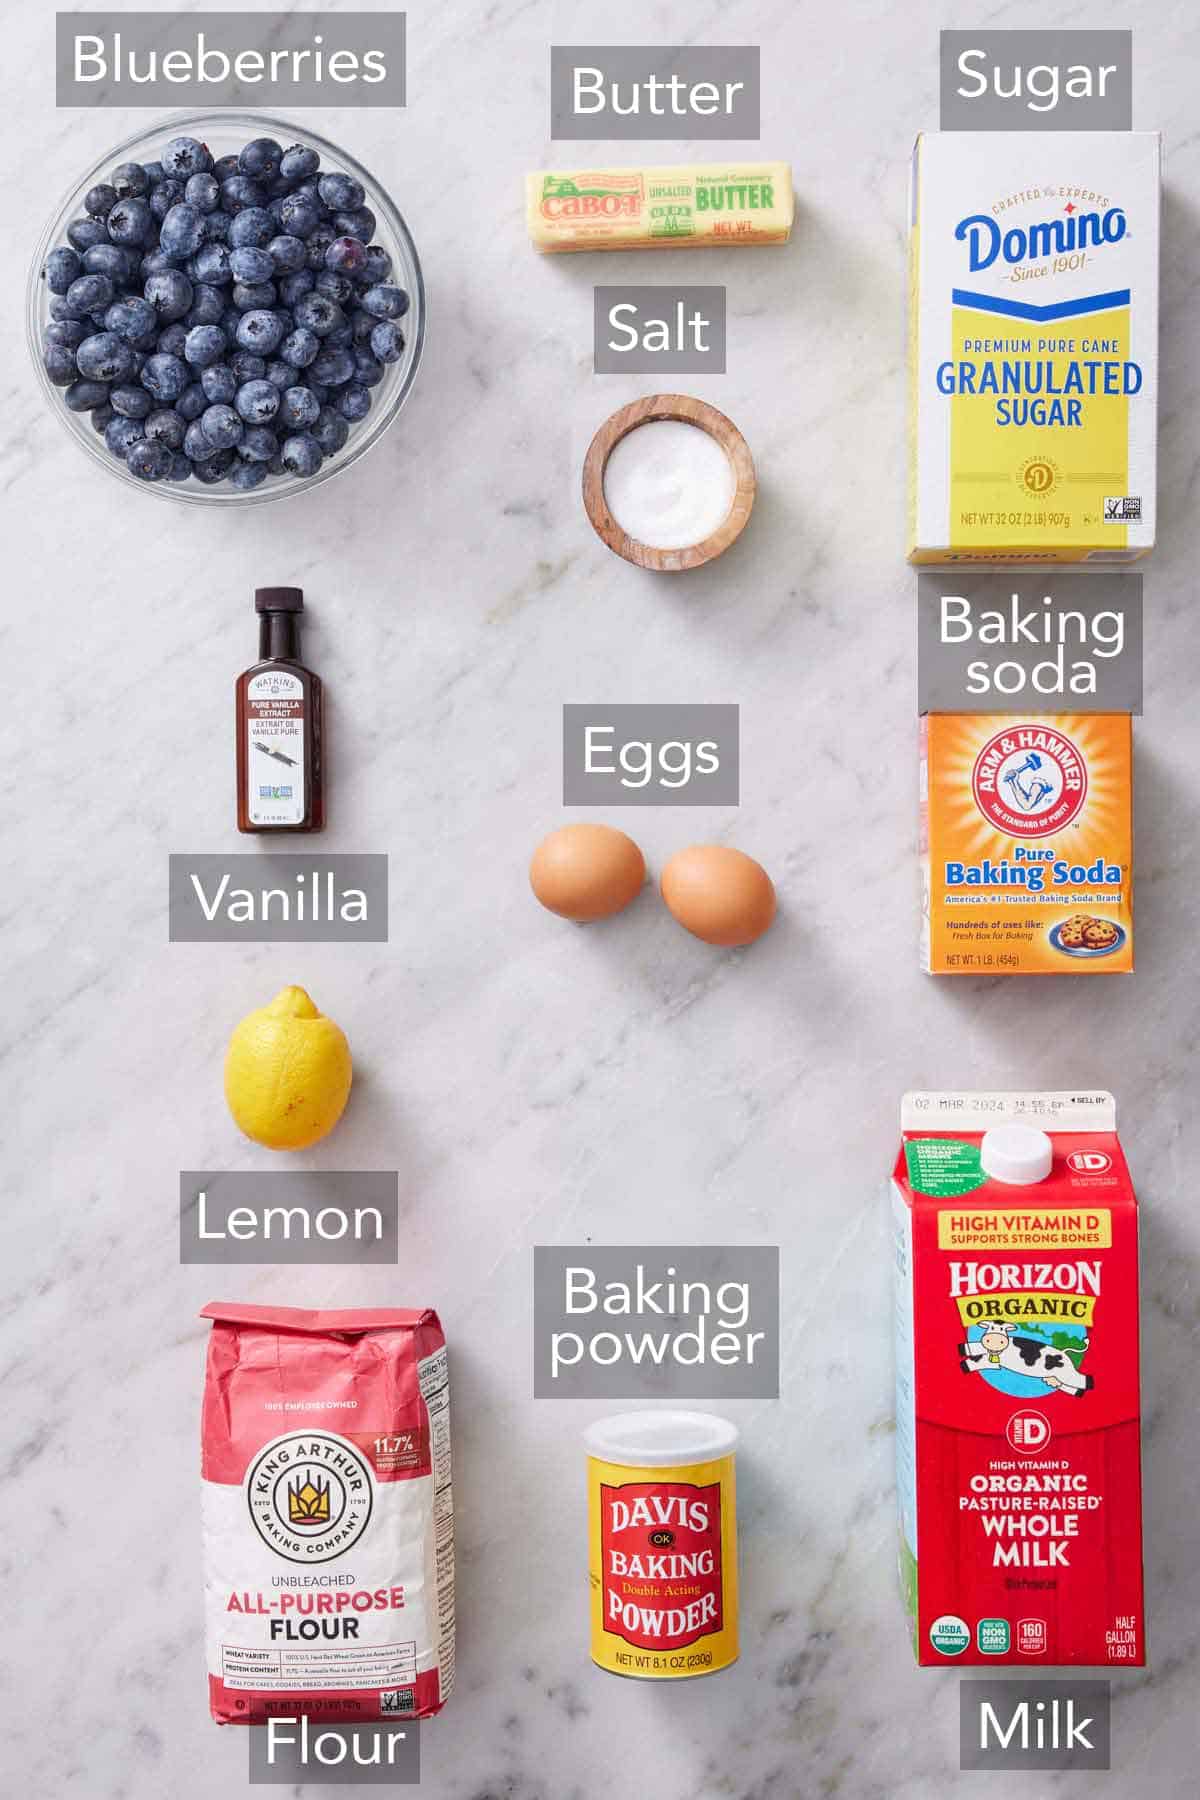 Ingredients needed to make blueberry pancakes.